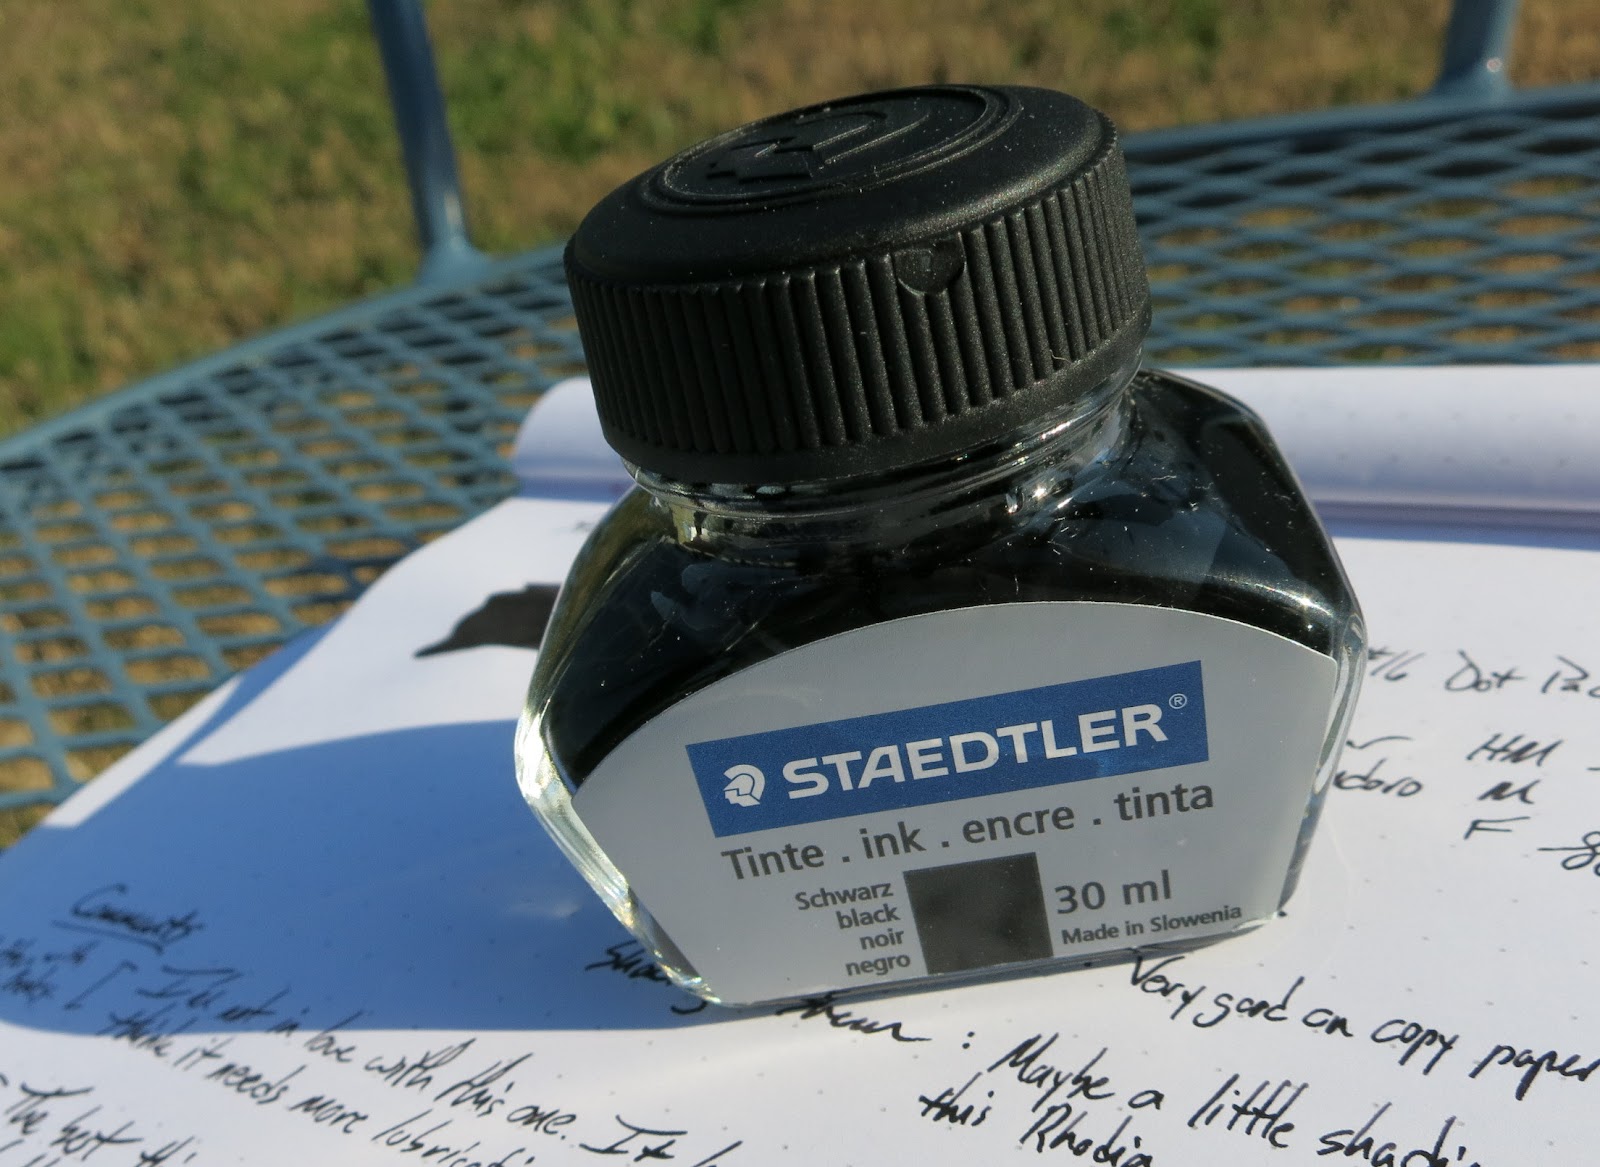 Some early thoughts on the Staedtler TRX fountain pen